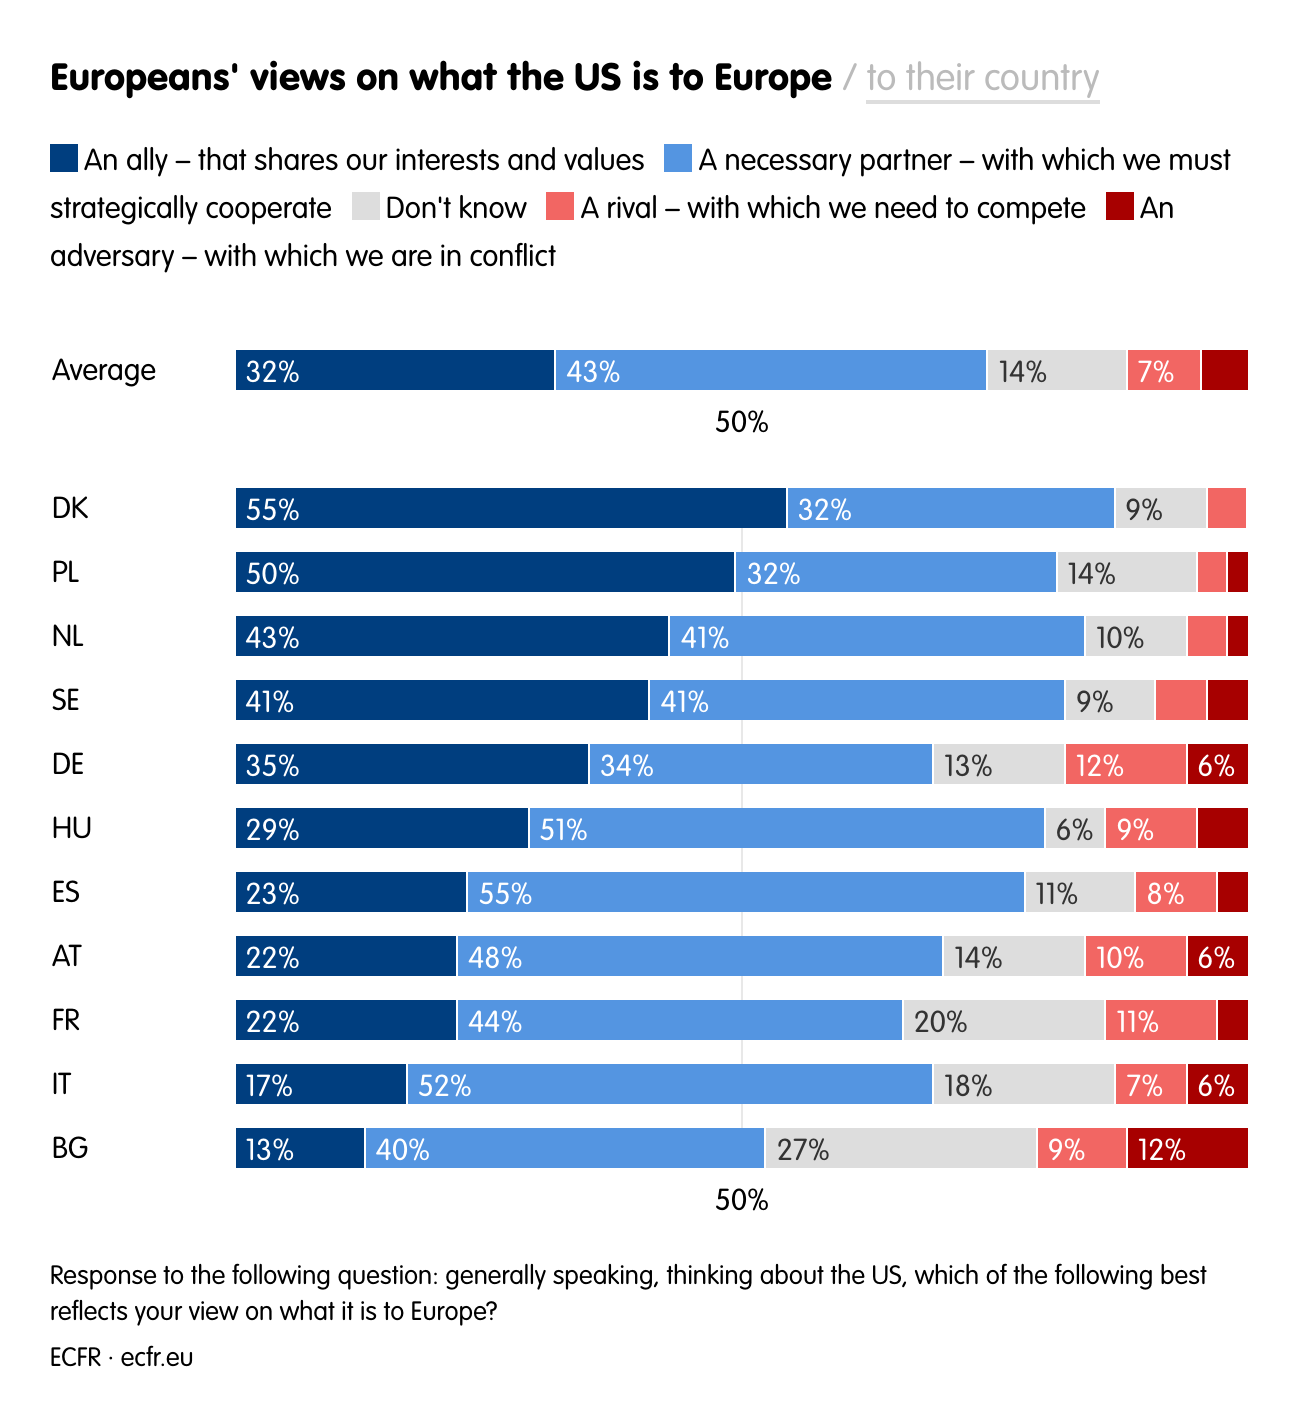 Europeans' views on what the US is to Europe